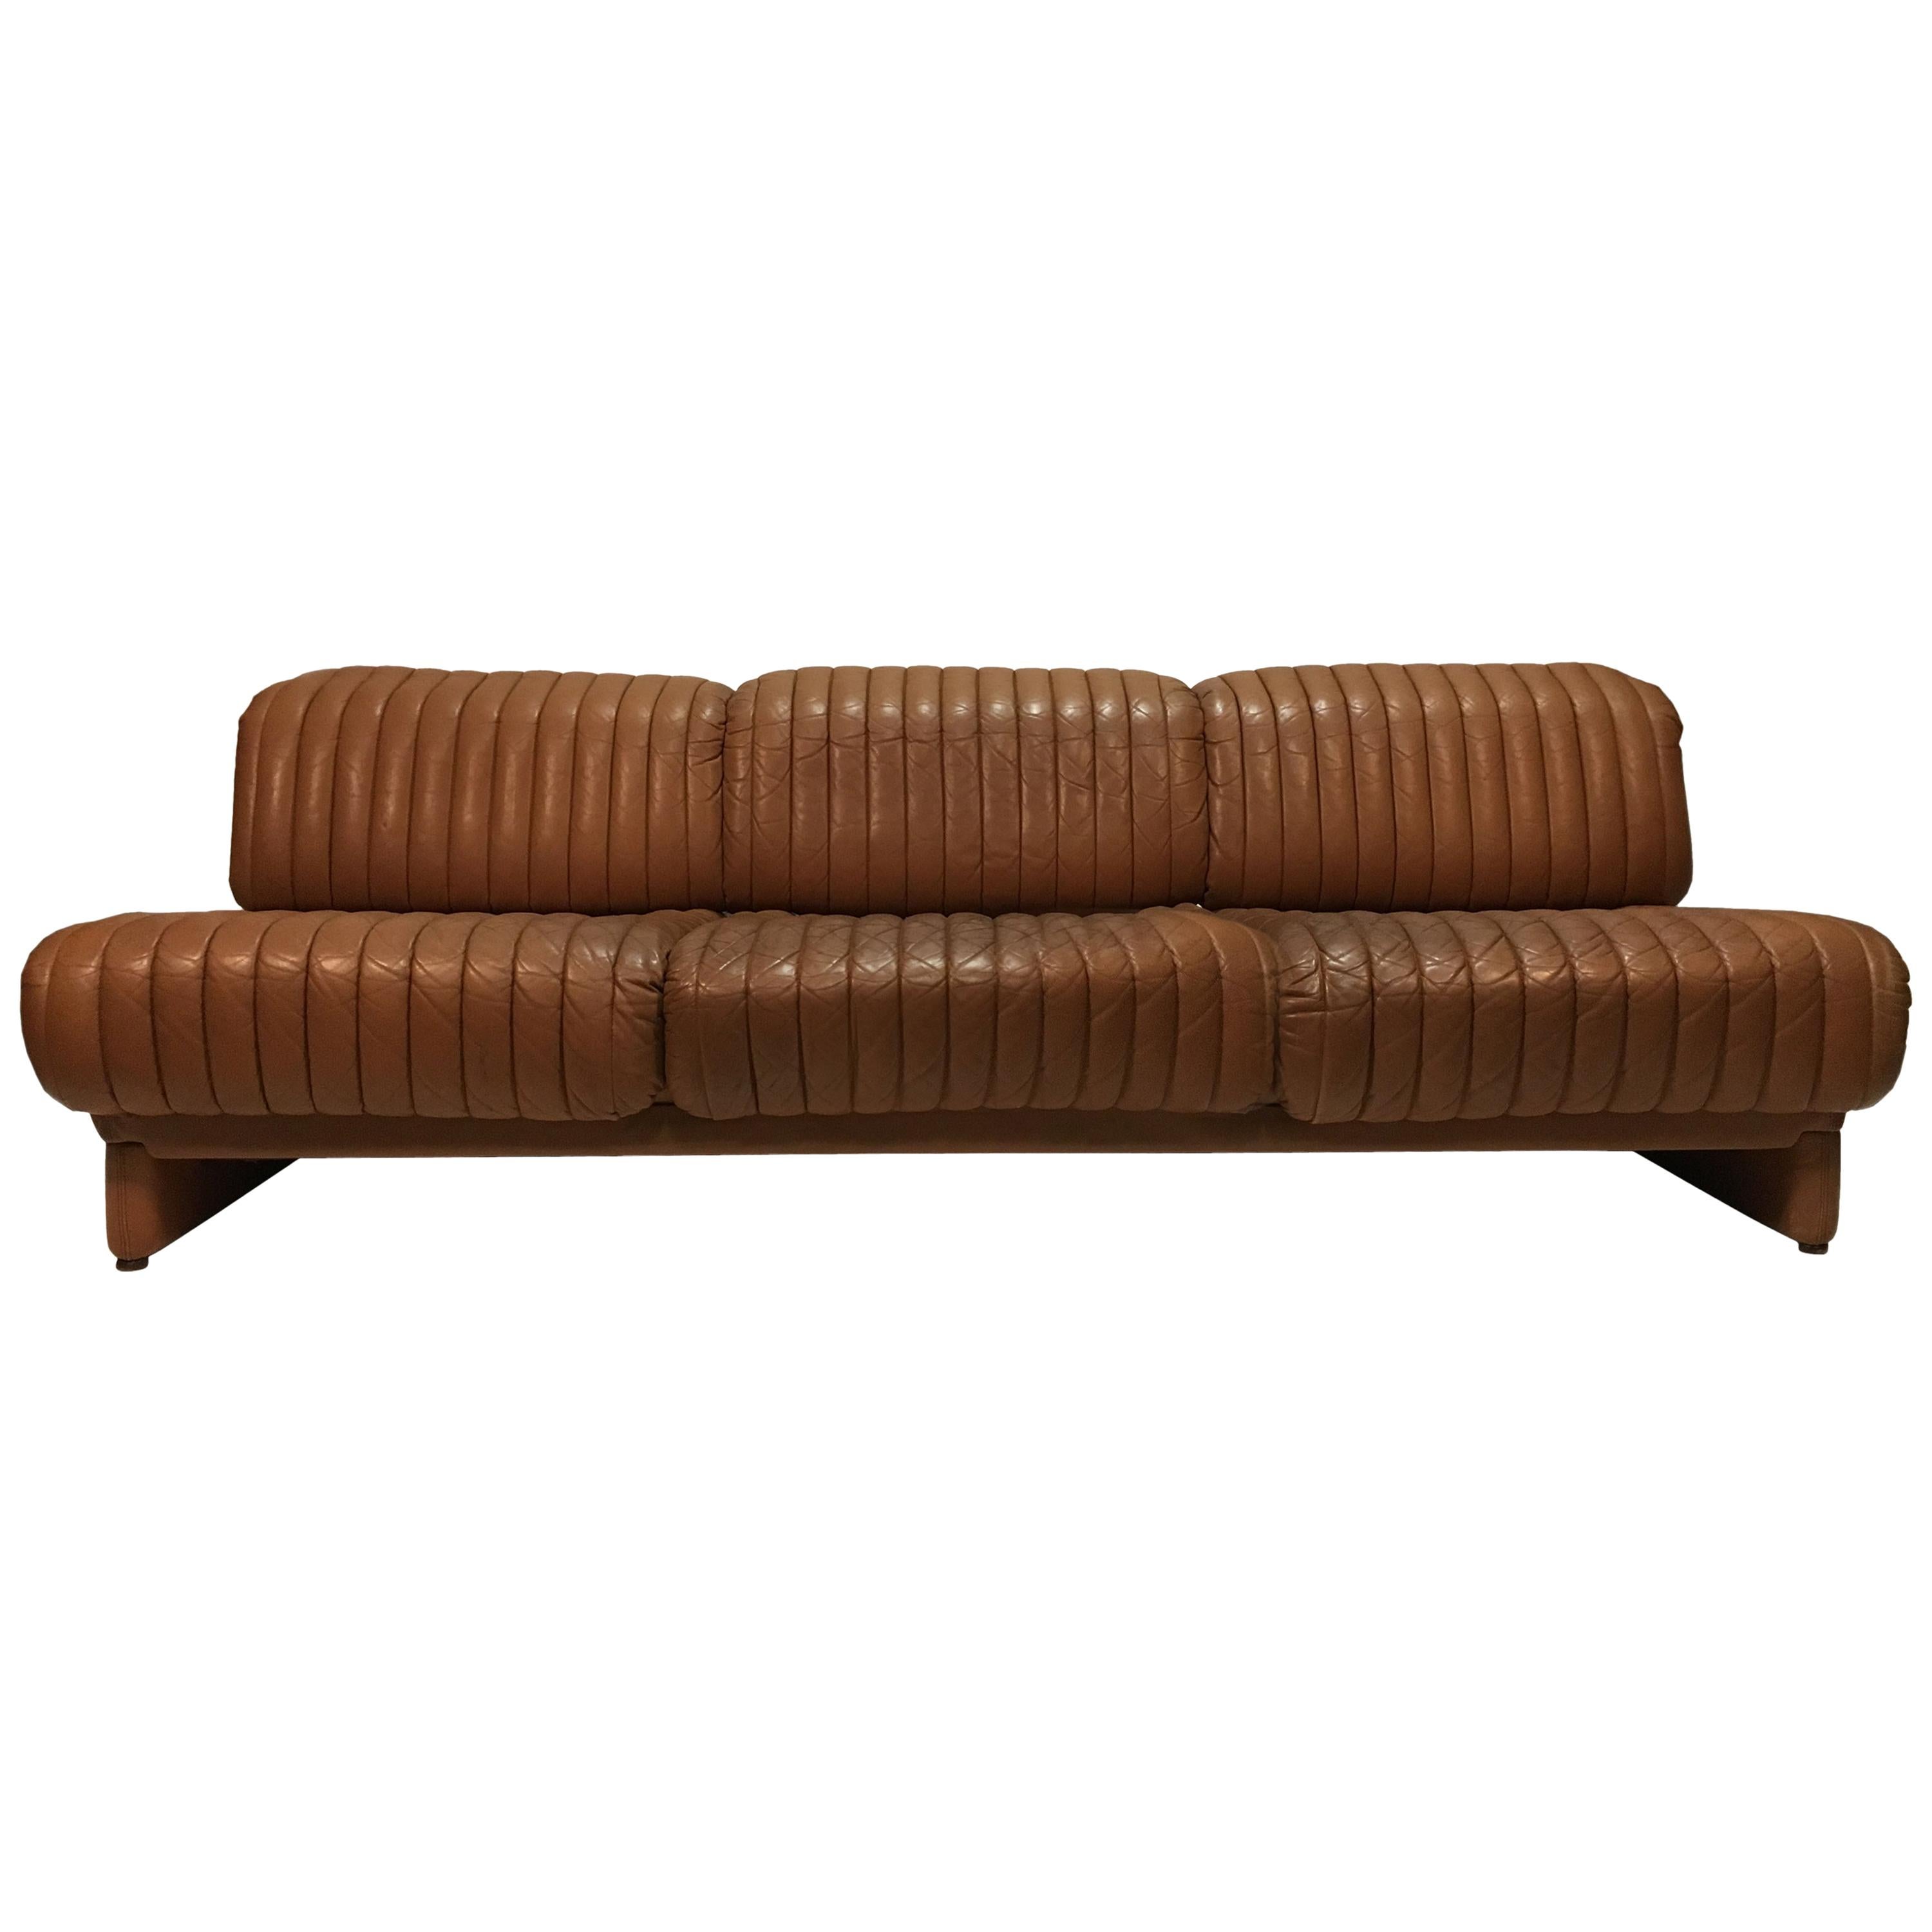 Wittmann 'Independence' Daybed Sofa Patinated Cognac Leather, Austria, 1970s